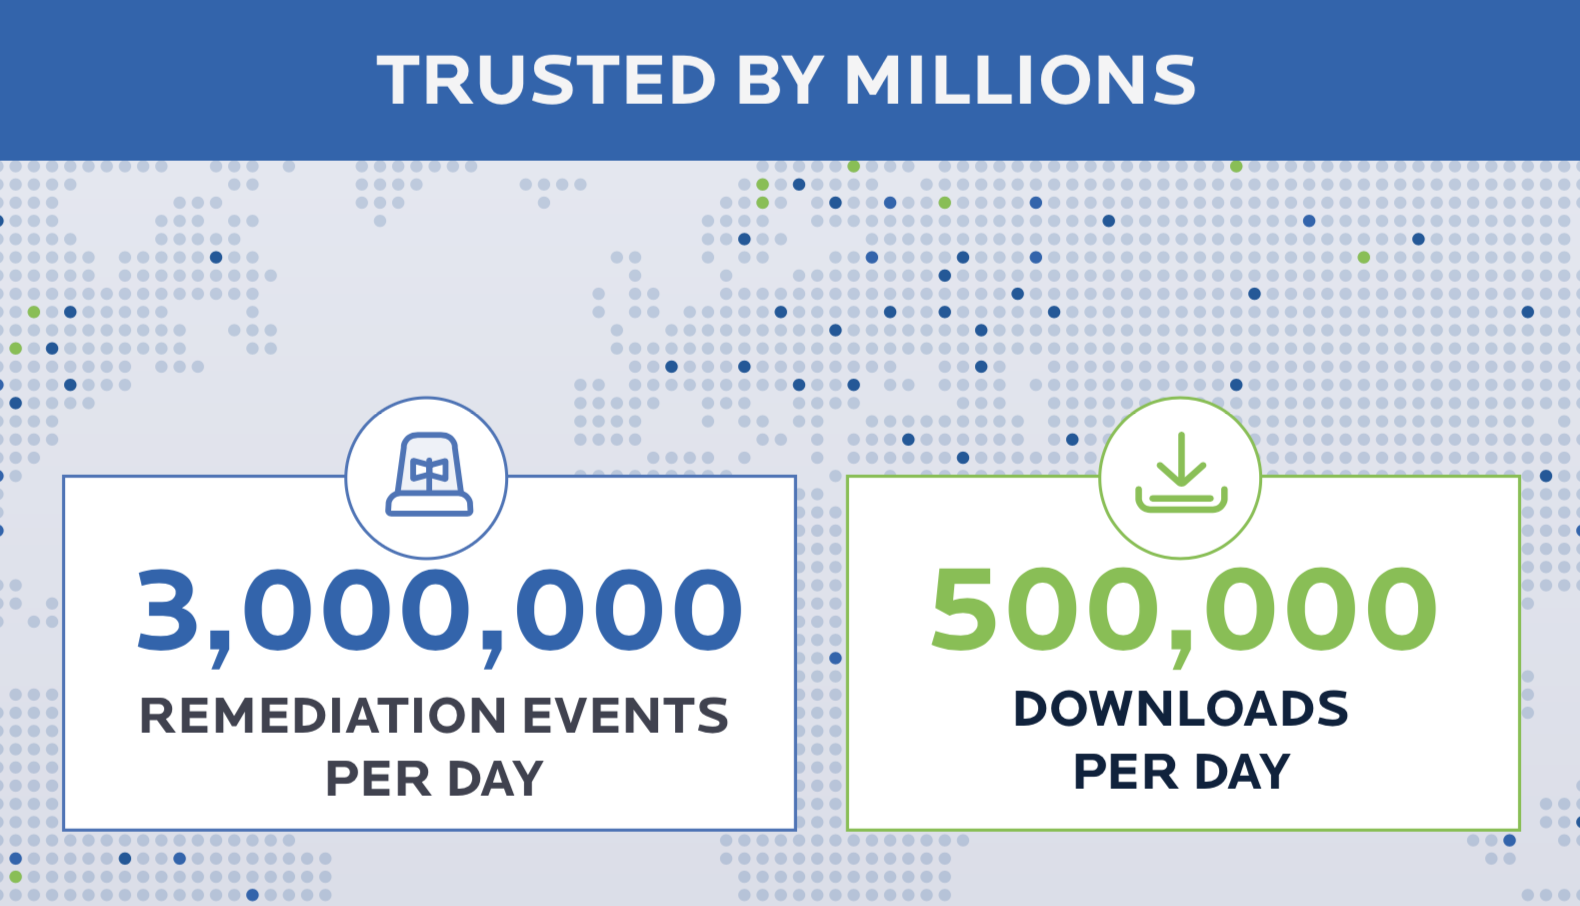 Trusted by millions - Malwarebytes 500,000 downloads per day